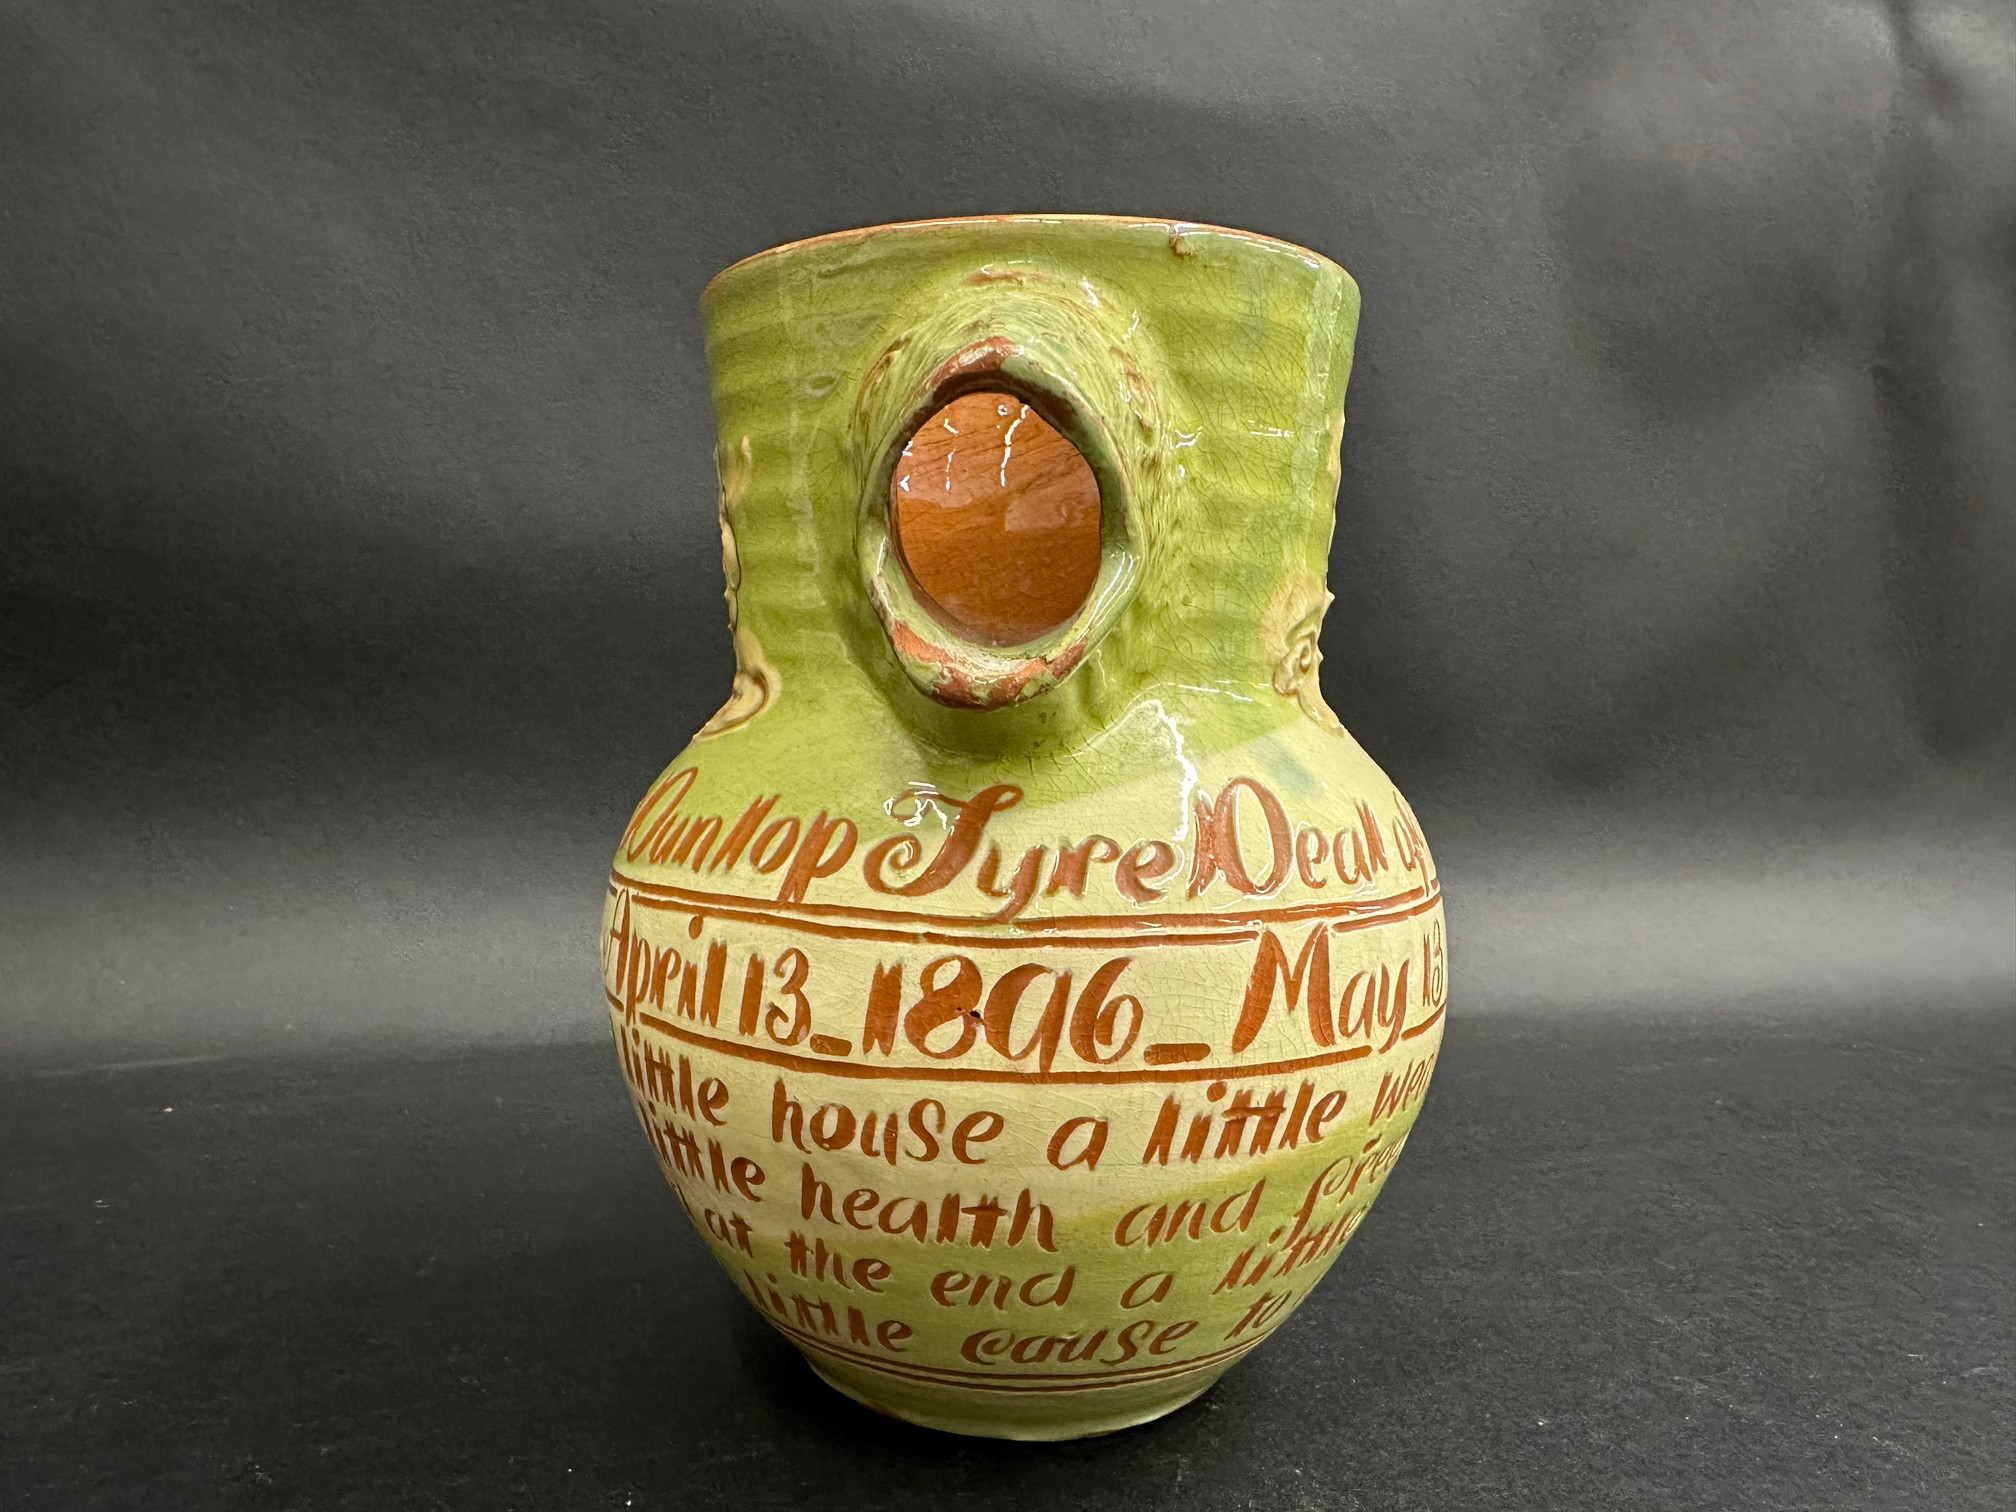 A rare 'The Great Dunlop Tyre Deal of Five Millions' Branham Pottery jug, circa 1896. - Image 2 of 5